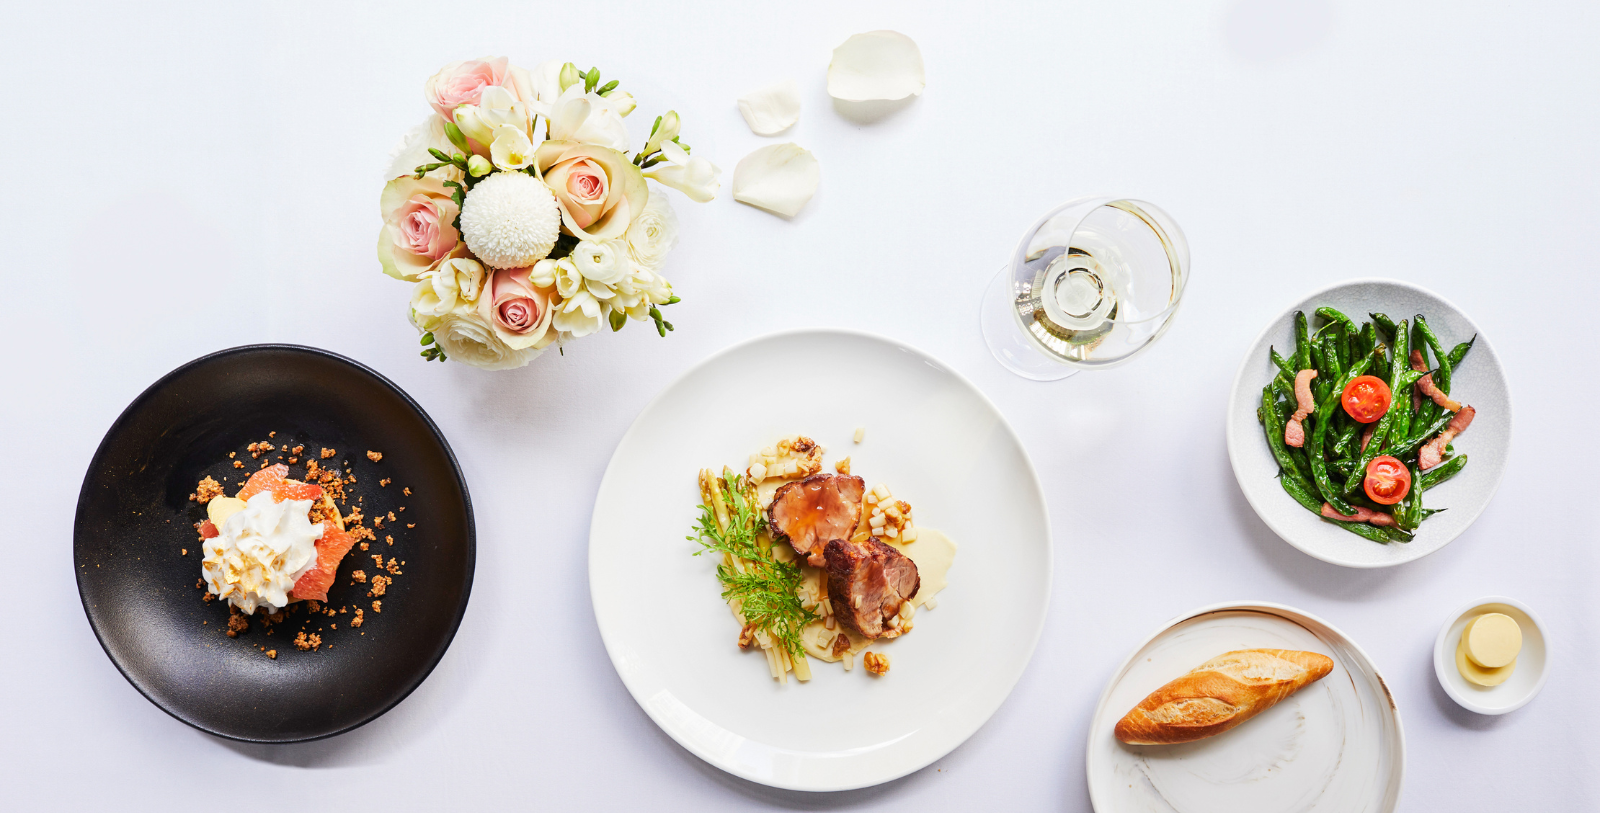 Taste the fascinating fusion of French, Australian, and international flavors at Sofitel Sydney Wentworth’s various dining venues.